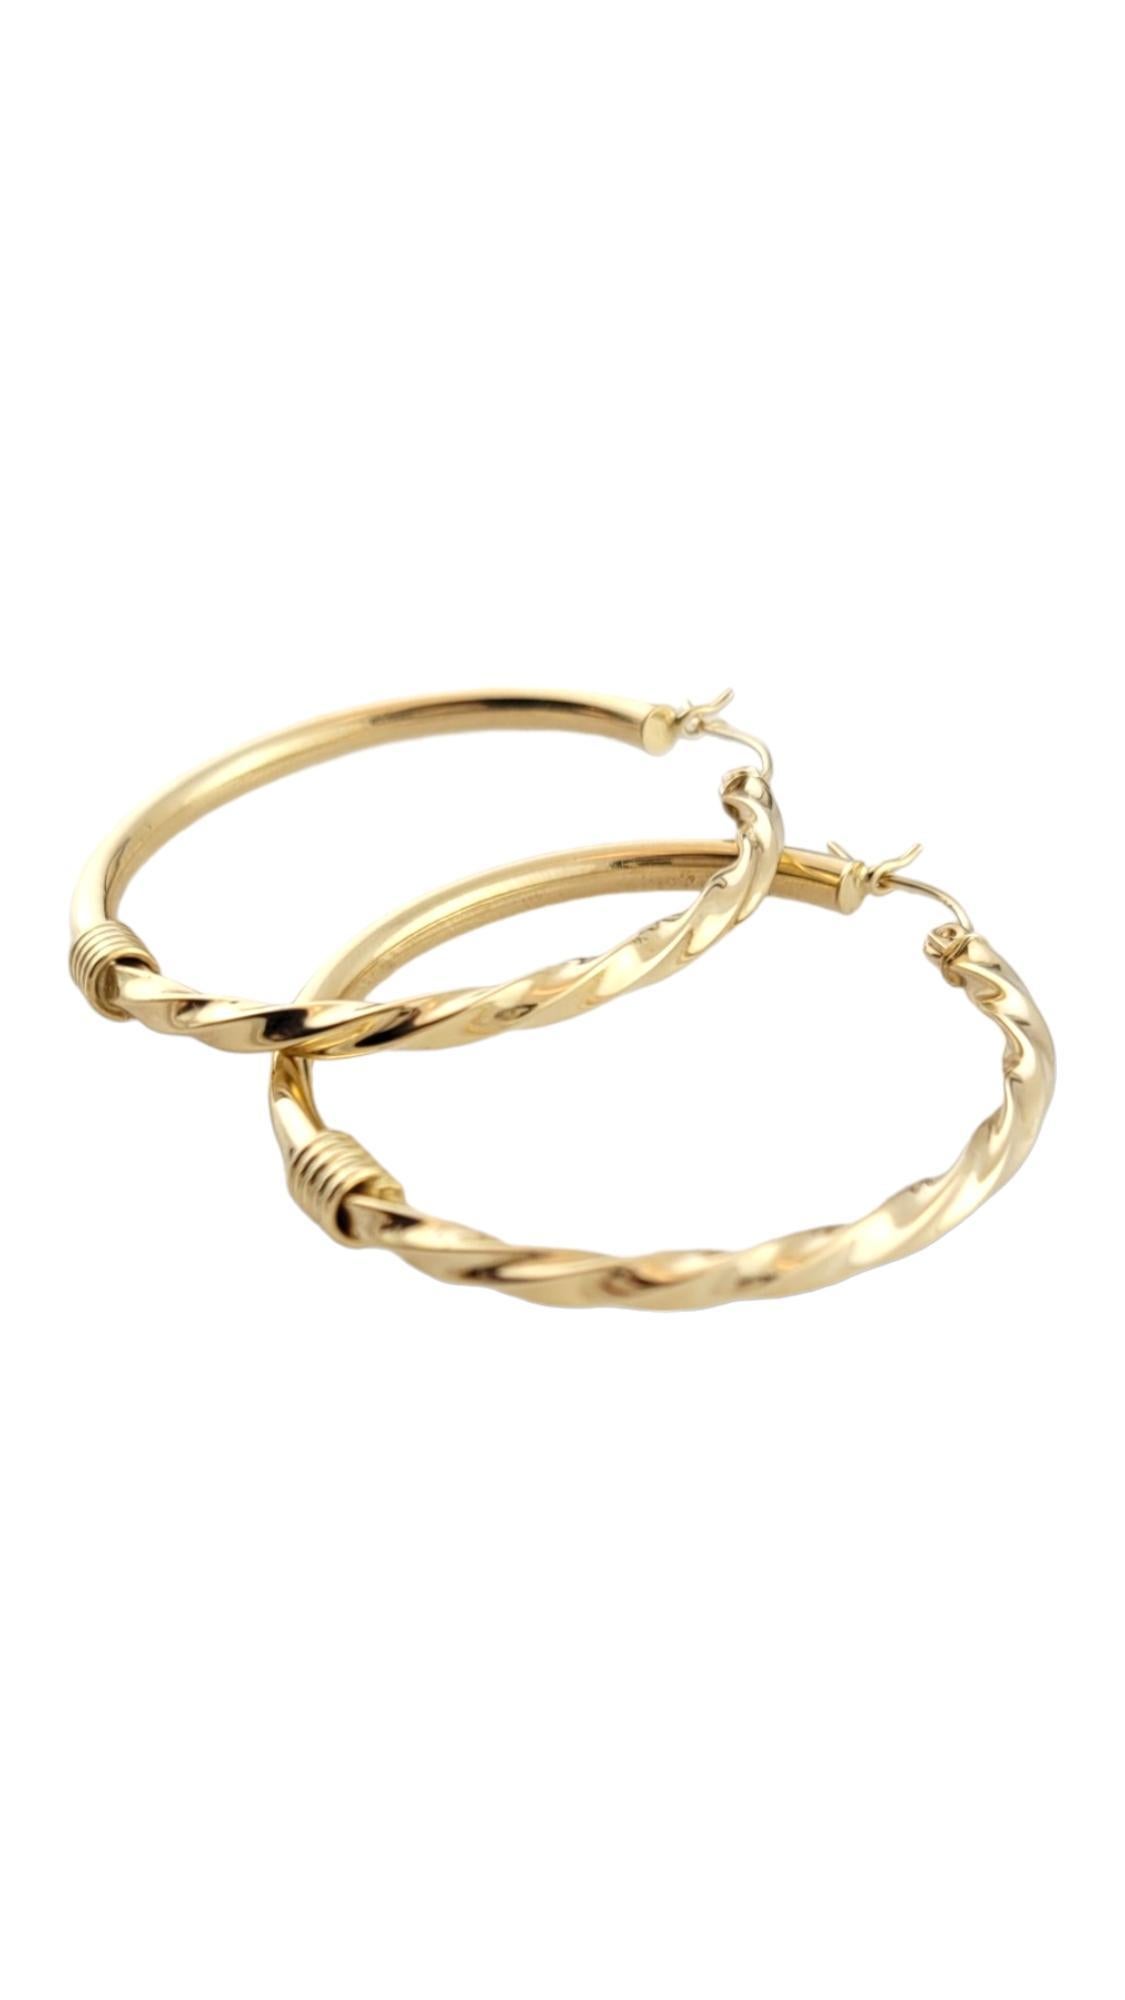 Vintage 14K Yellow Gold Twisted/ Smooth Hoop Earrings

This gorgeous set of hoop earrings have a beautiful and unique design where one half of the earrings are in a twisted pattern while the other half has a nice smooth finish!

Diameter: 40.5mm